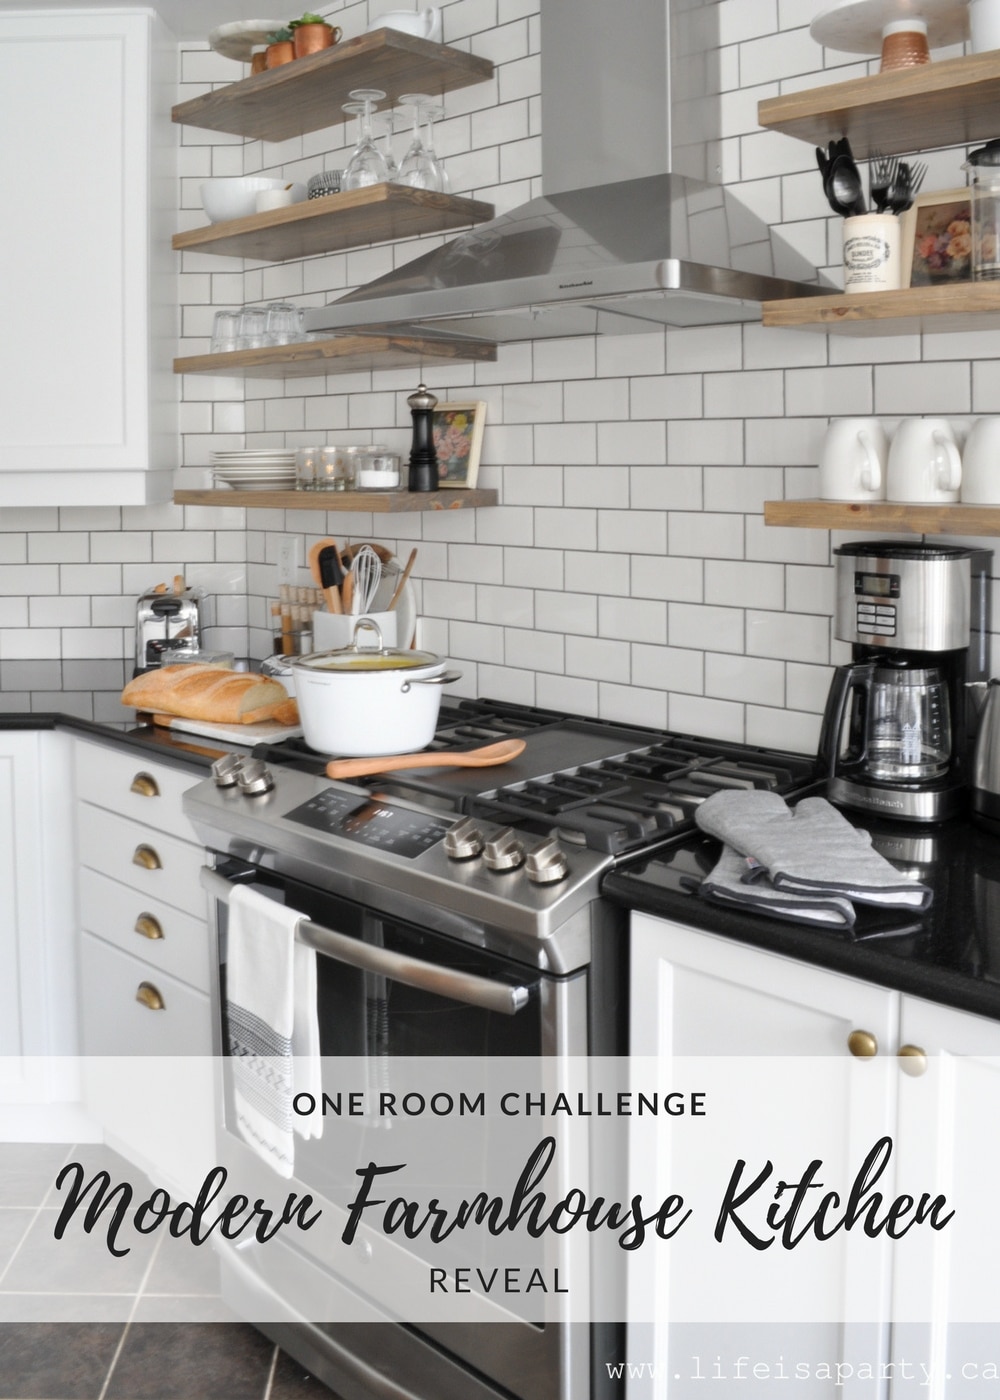 Modern Farmhouse Kitchen Makeover -painted cabinets, white subway tile with dark grout, rustic wood shelves, & brass touches in a black and white makeover.